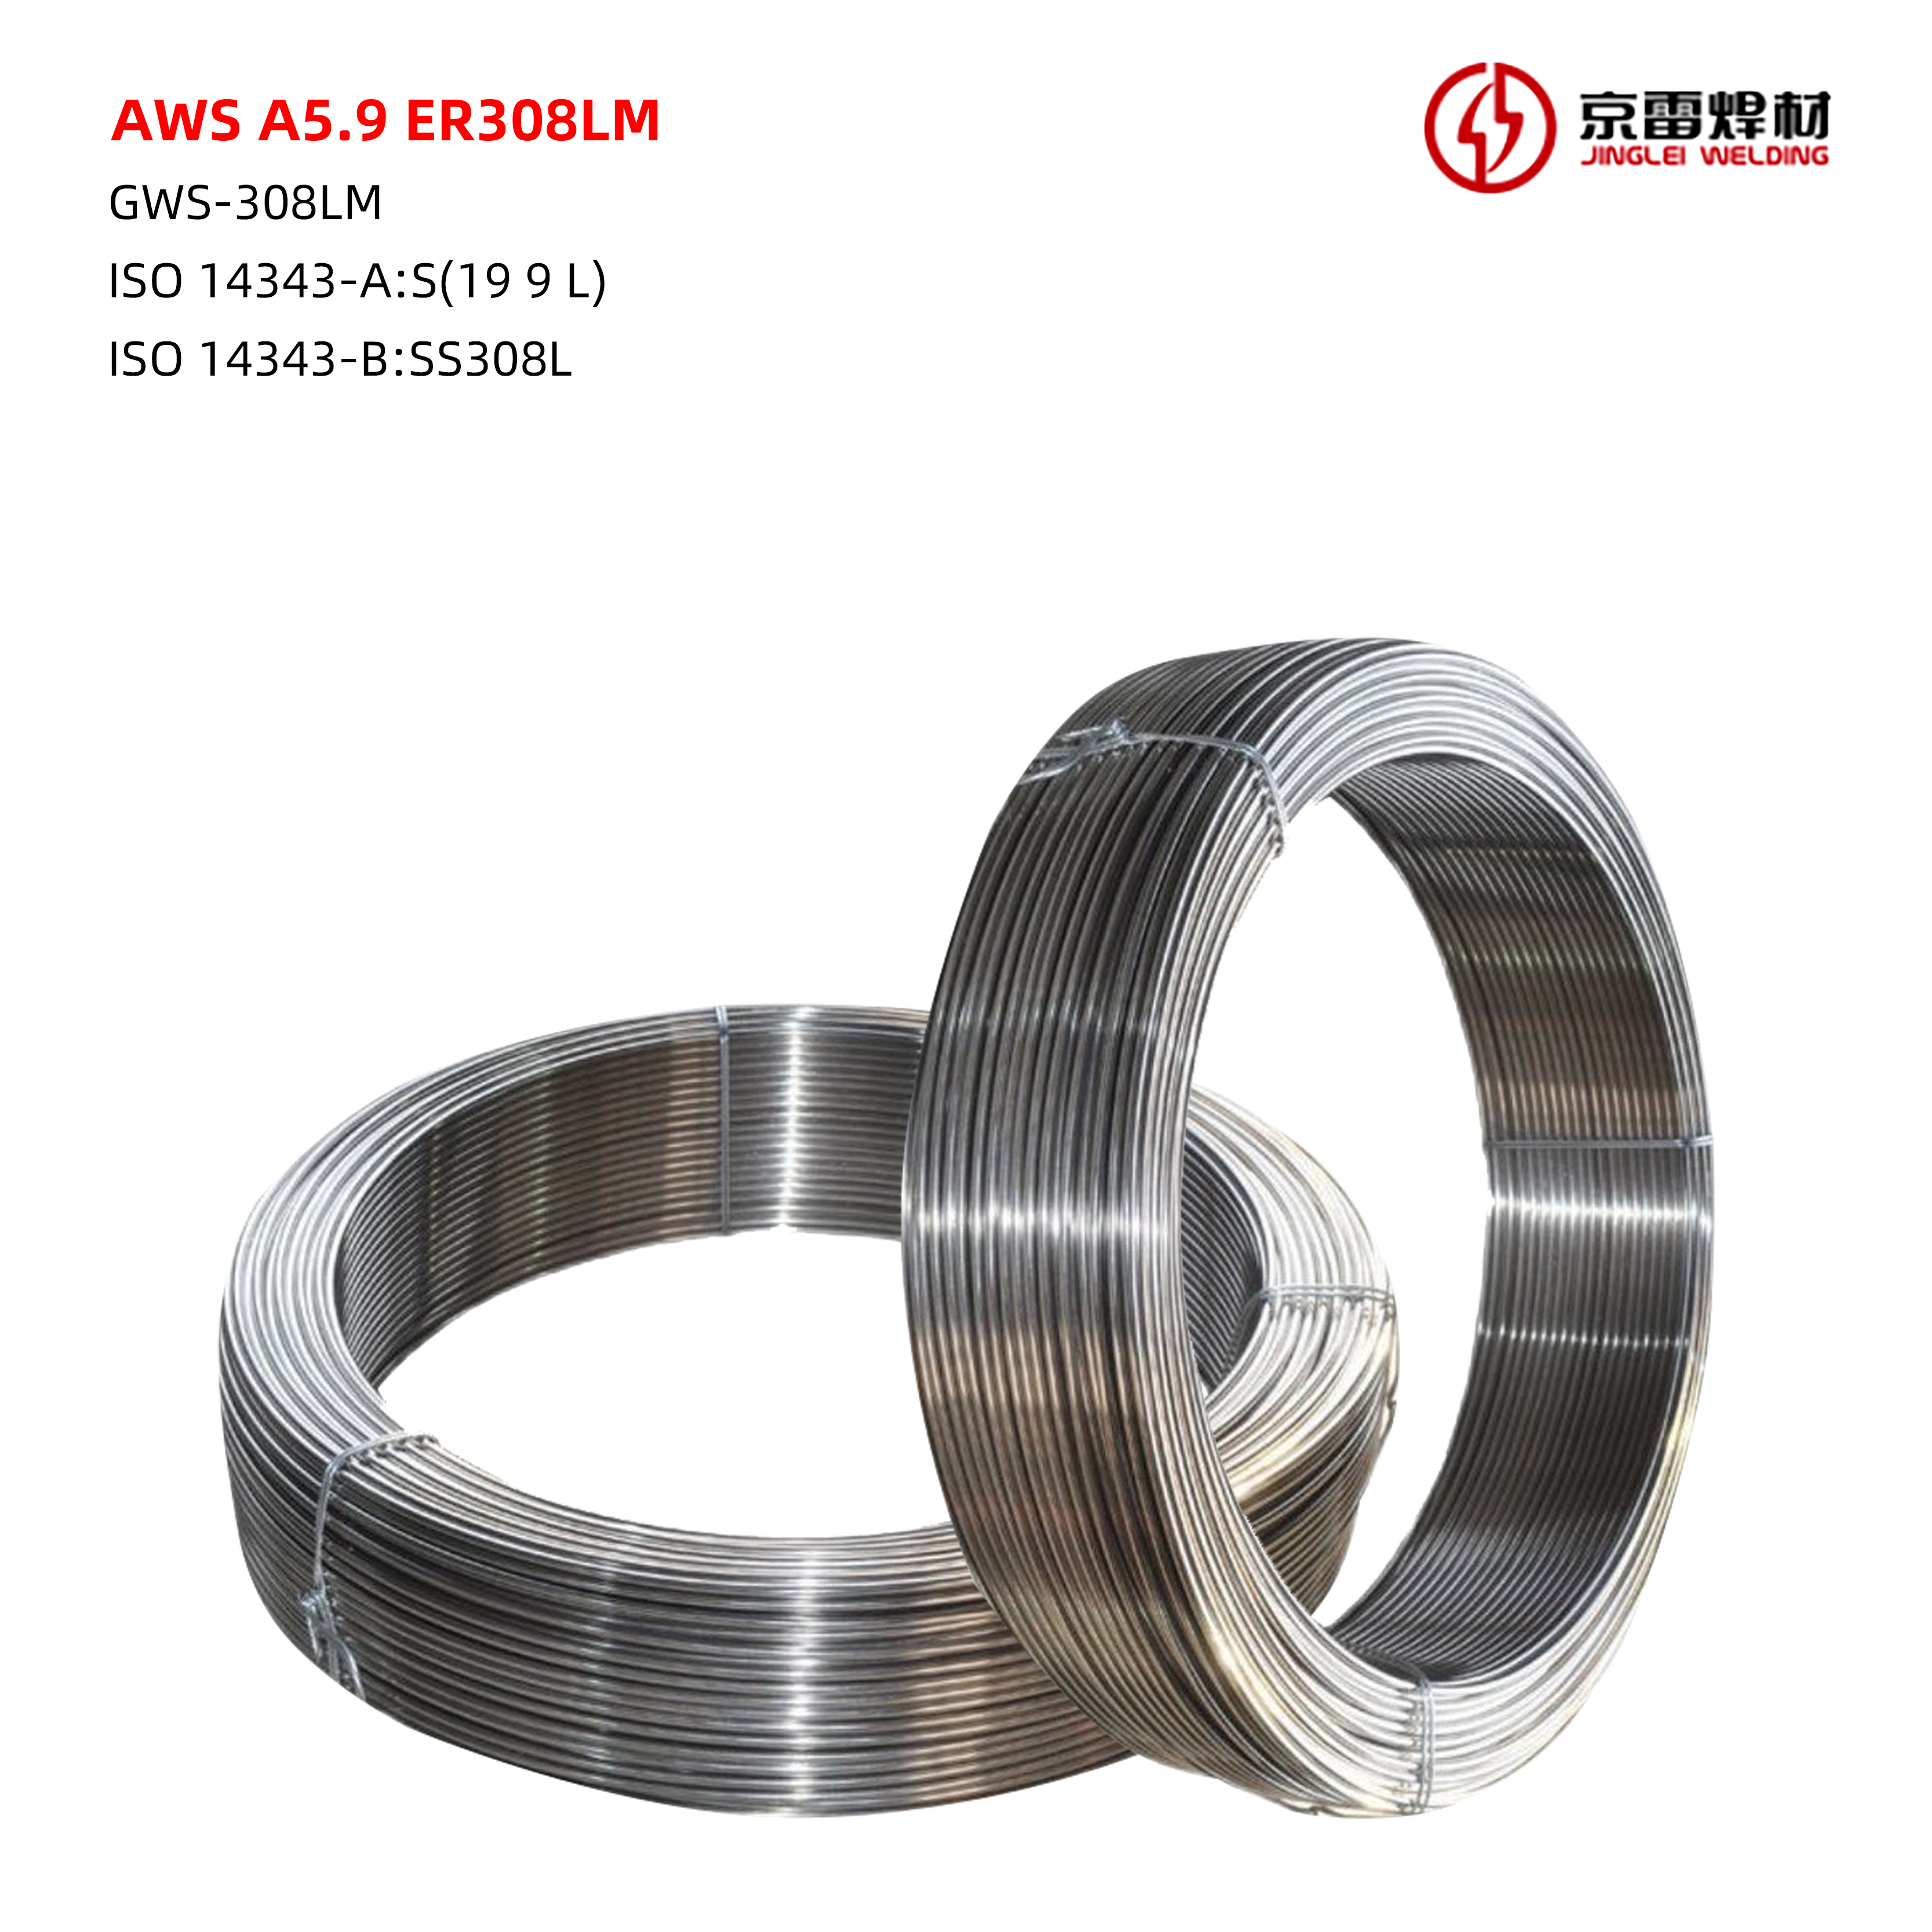 Stainless steels SAW welding wire ER308L and flux Welding jointing